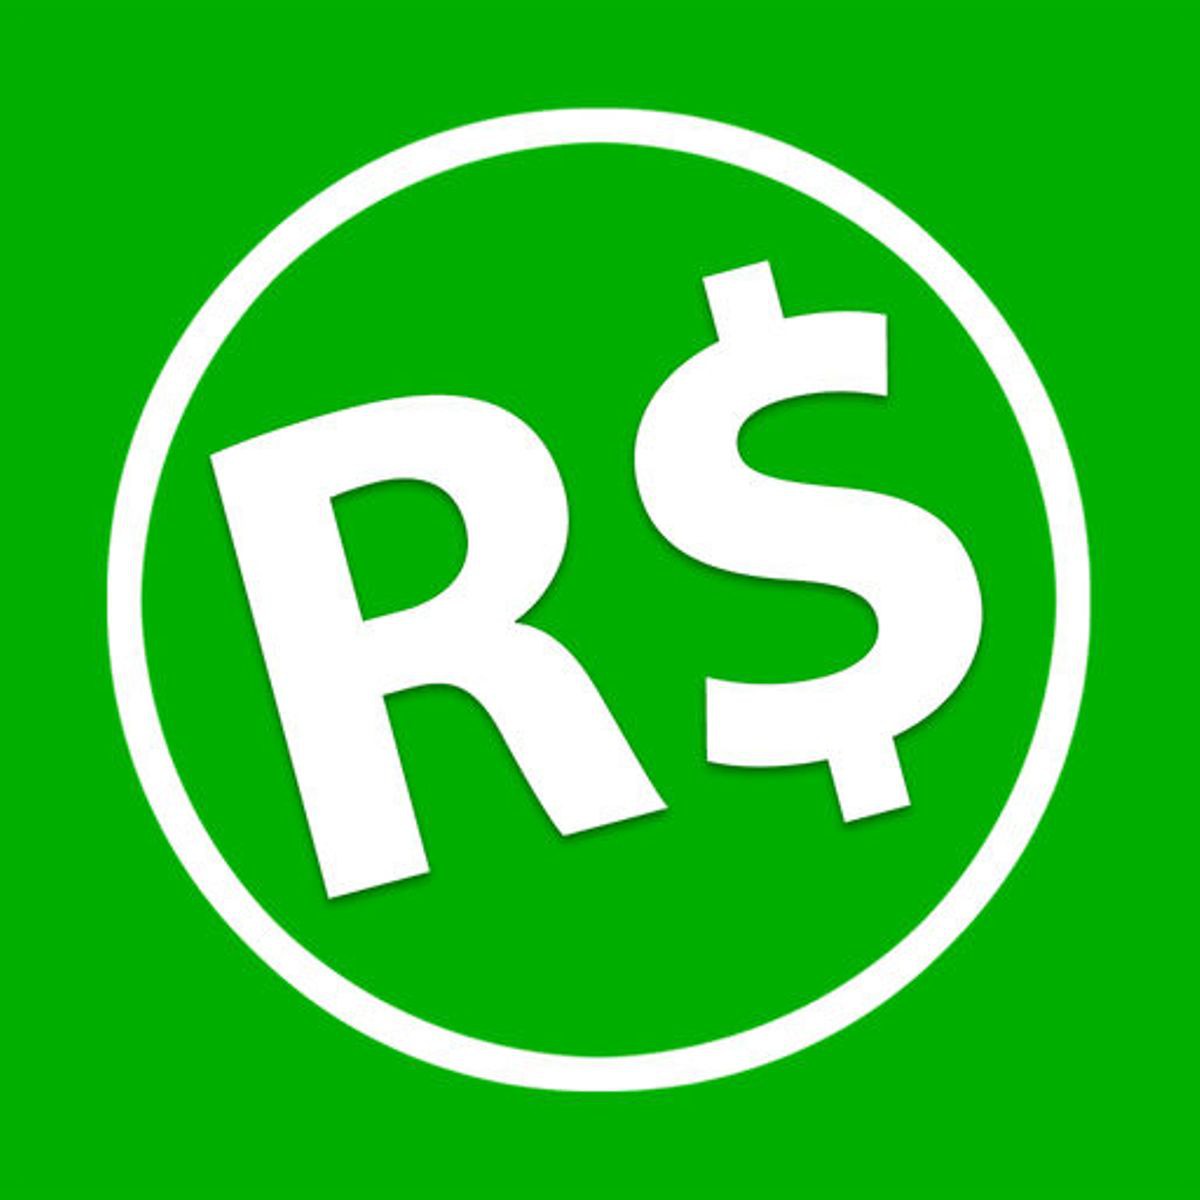 Rbx Robux Rewards - rbxboost com free robux how to get free robux from buxgg